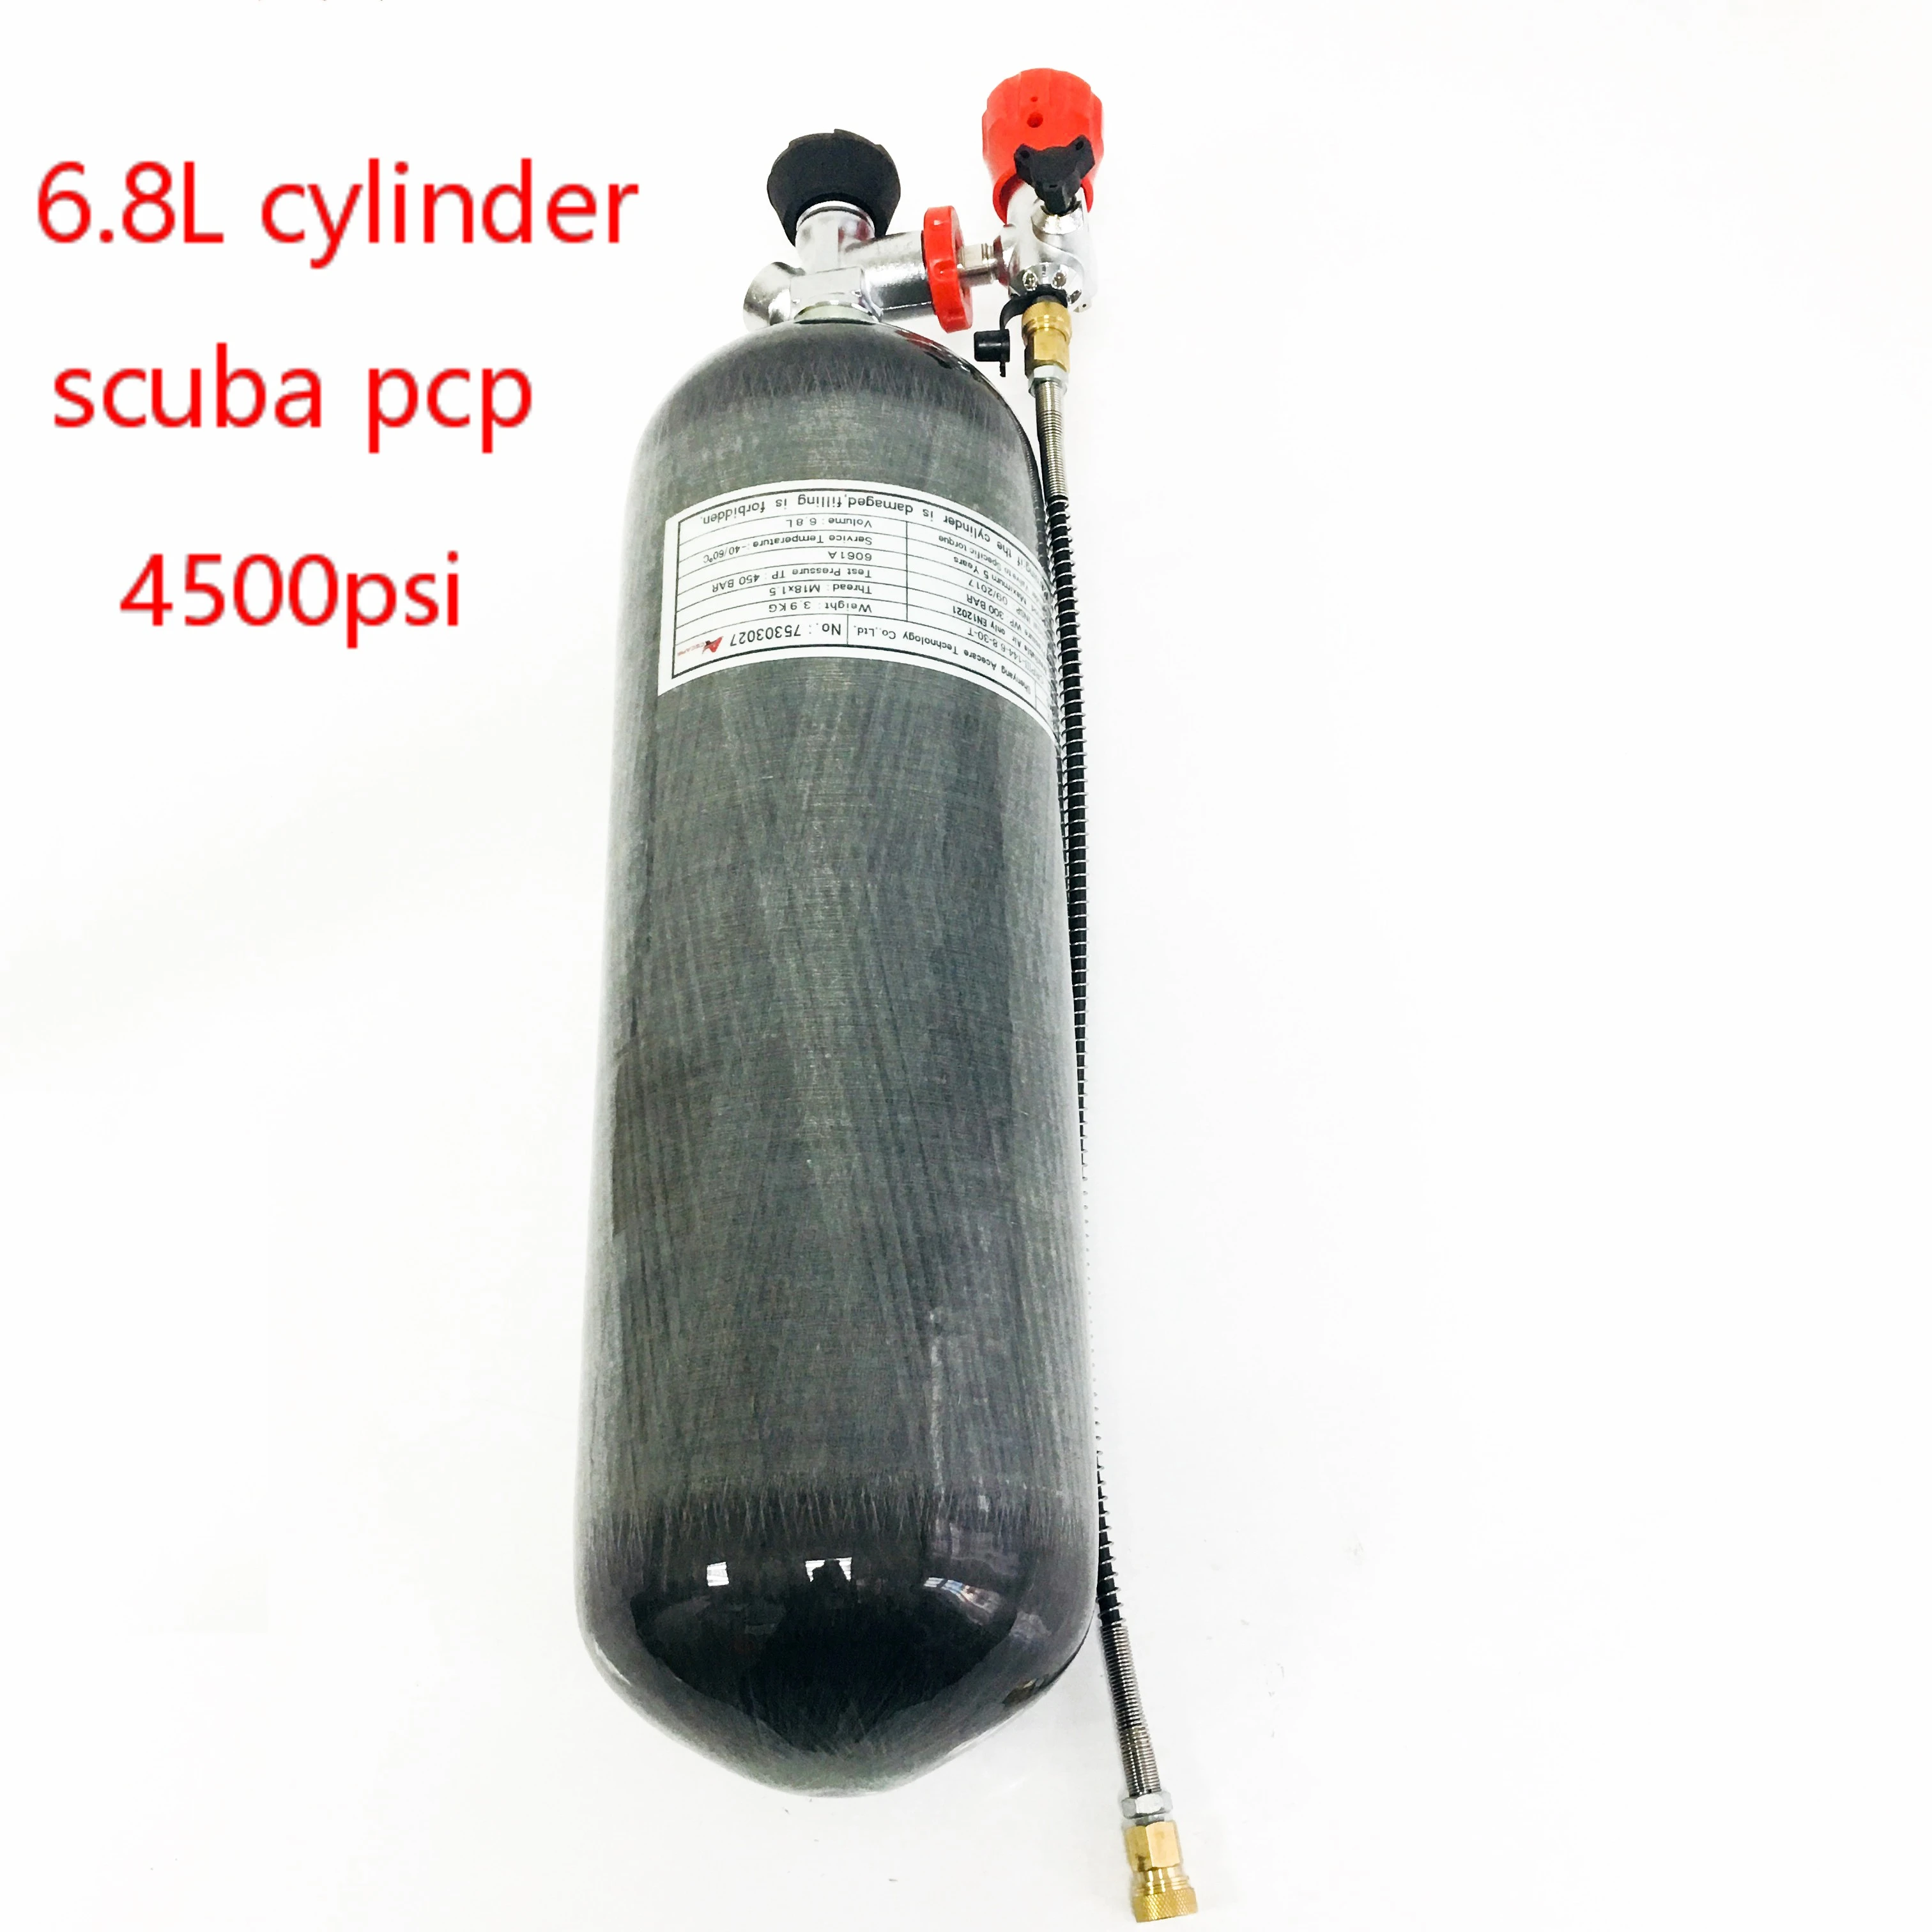 fire and carbon monoxide detector AC168301 6.8L 300Bar/4500Psi Cylinder Pcp PaintballCarbon Fiber Tank Underwater Gun Speargun Spearfishing AirforceCondor Acecare carbon detector